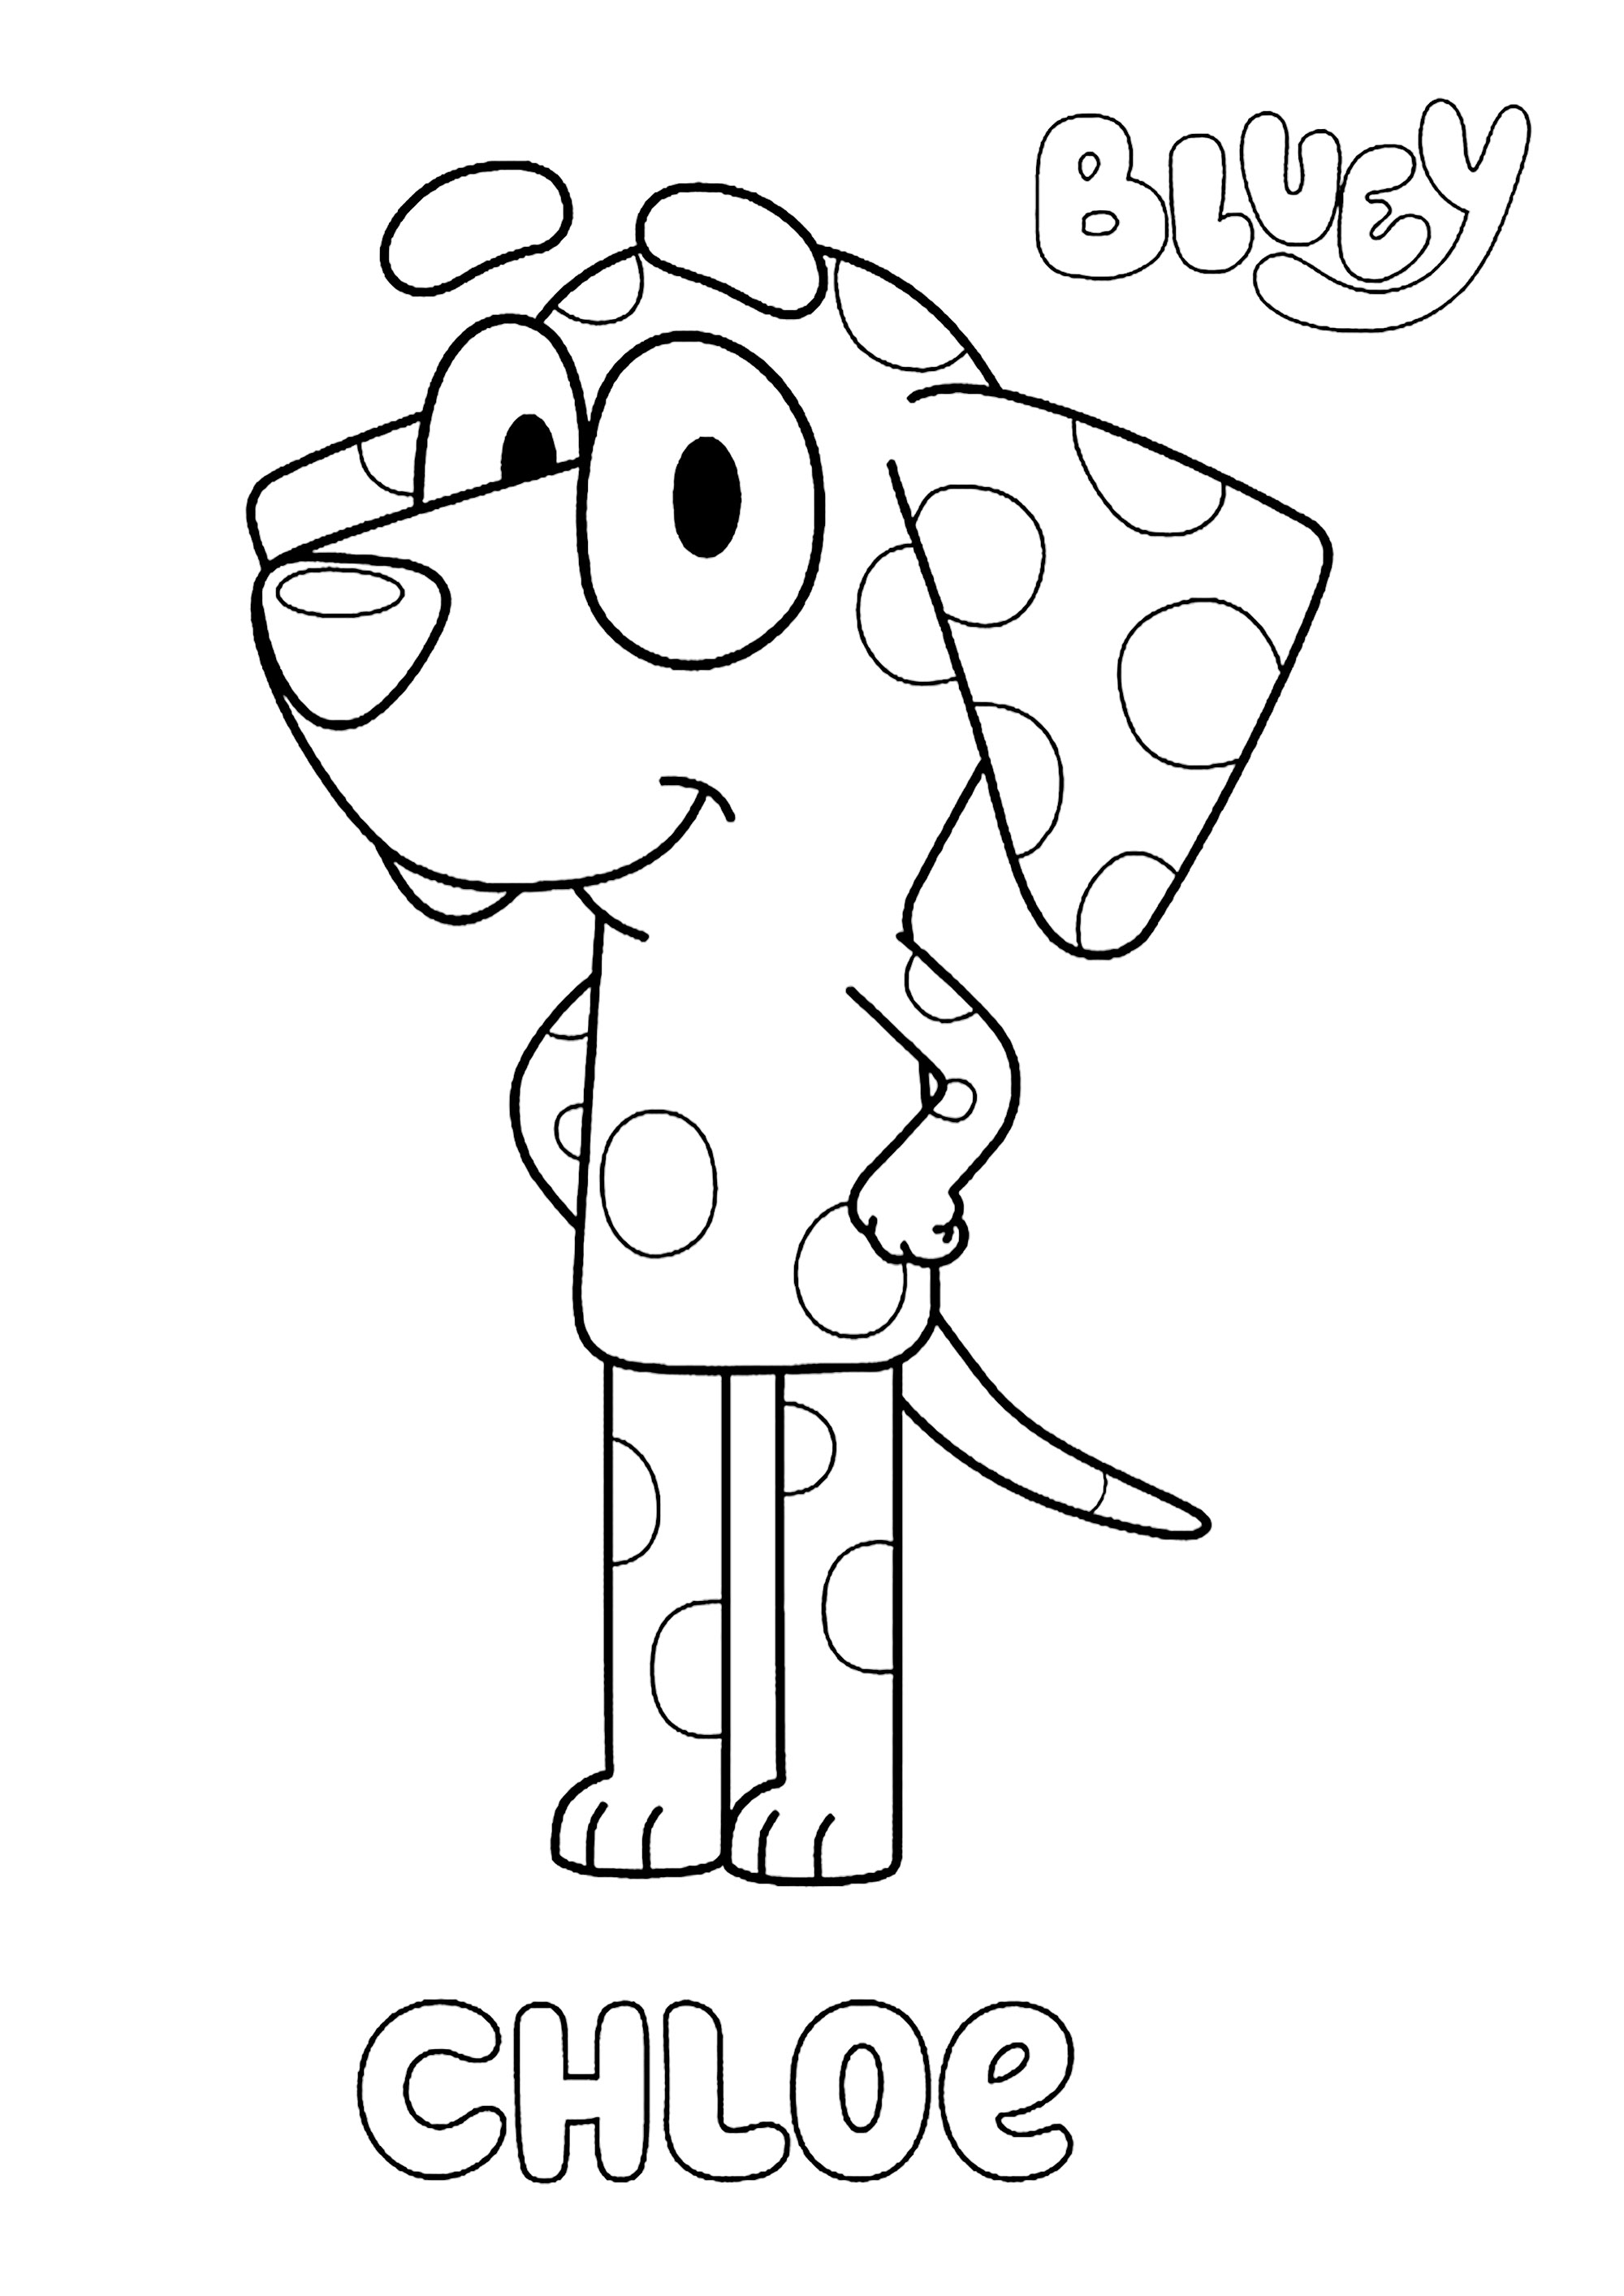 Coloring page with Bluey: Chloé